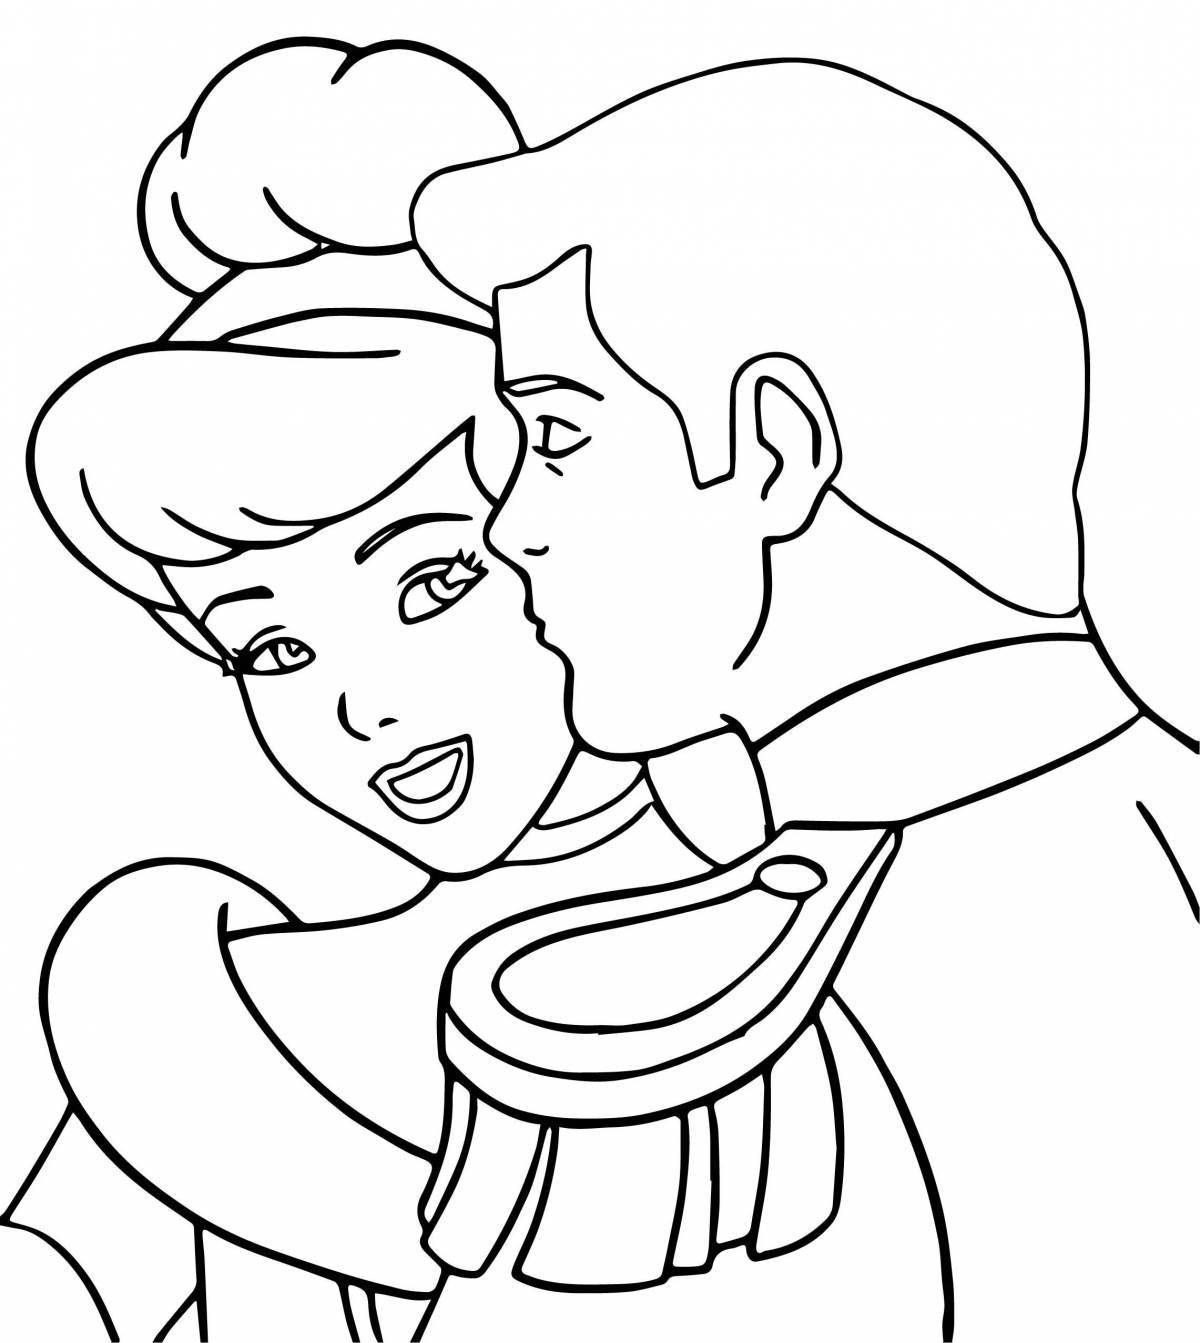 Exquisite princess and prince coloring book for kids